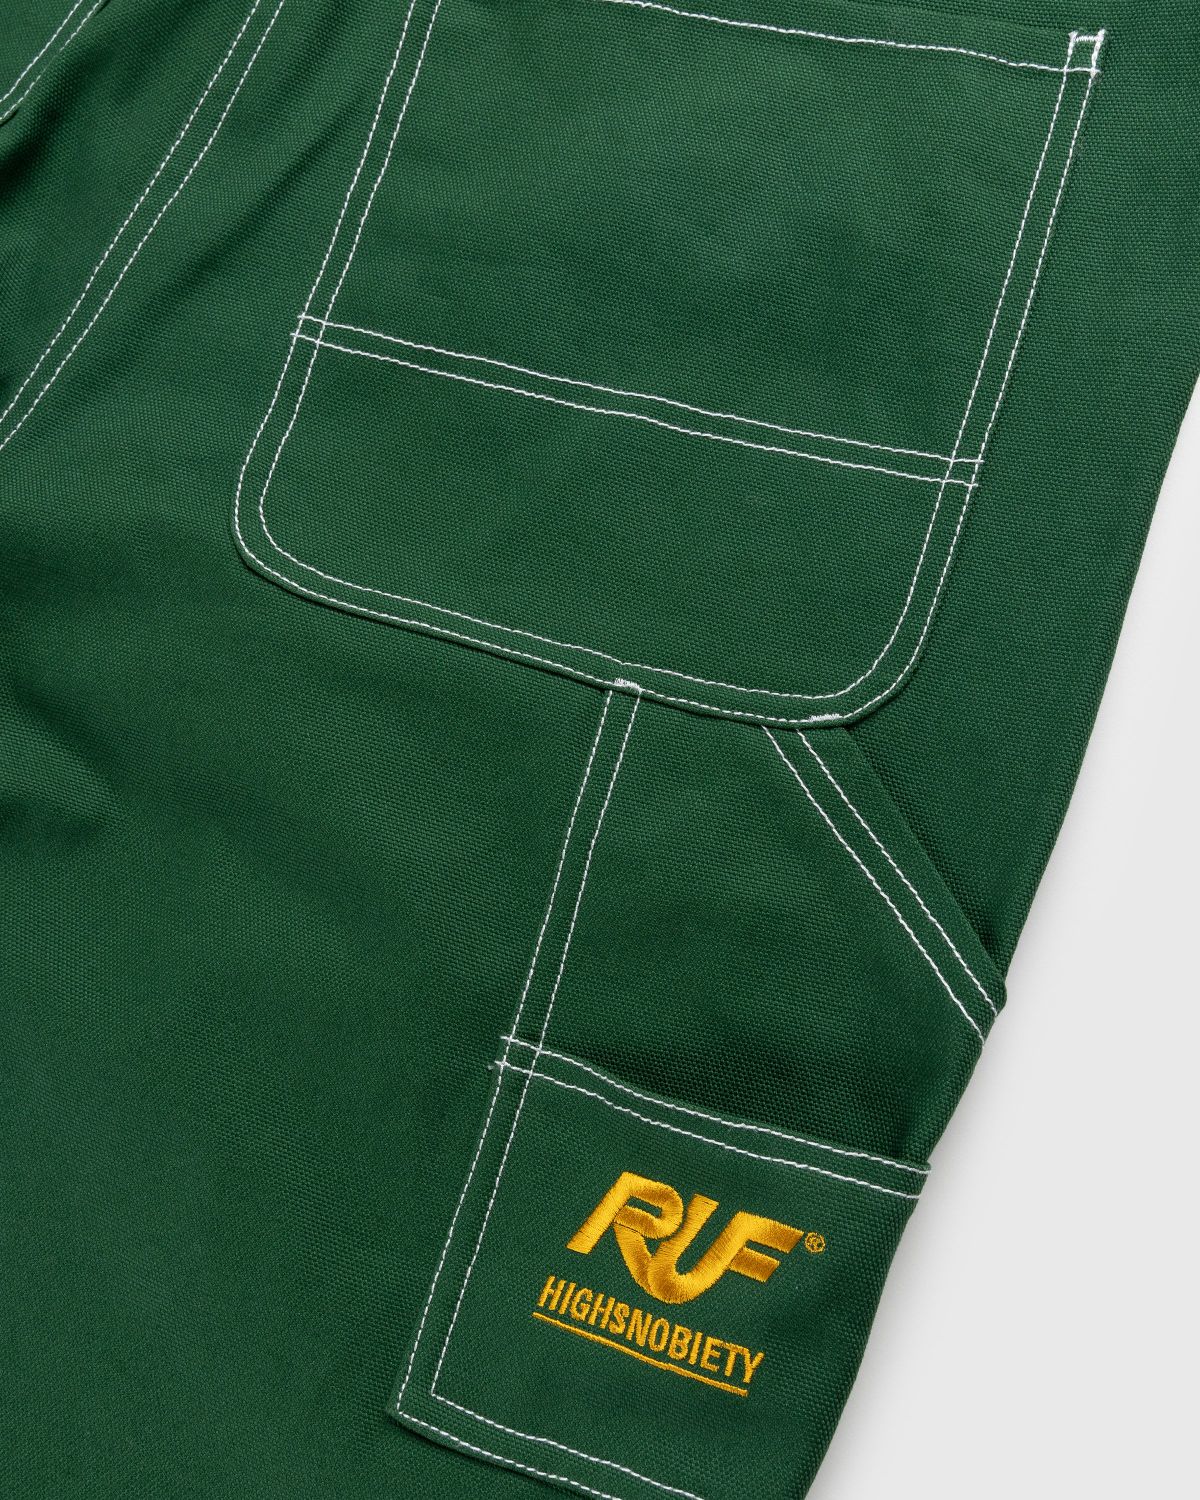 RUF x Highsnobiety – Cotton Overalls Green - Trousers - Green - Image 7